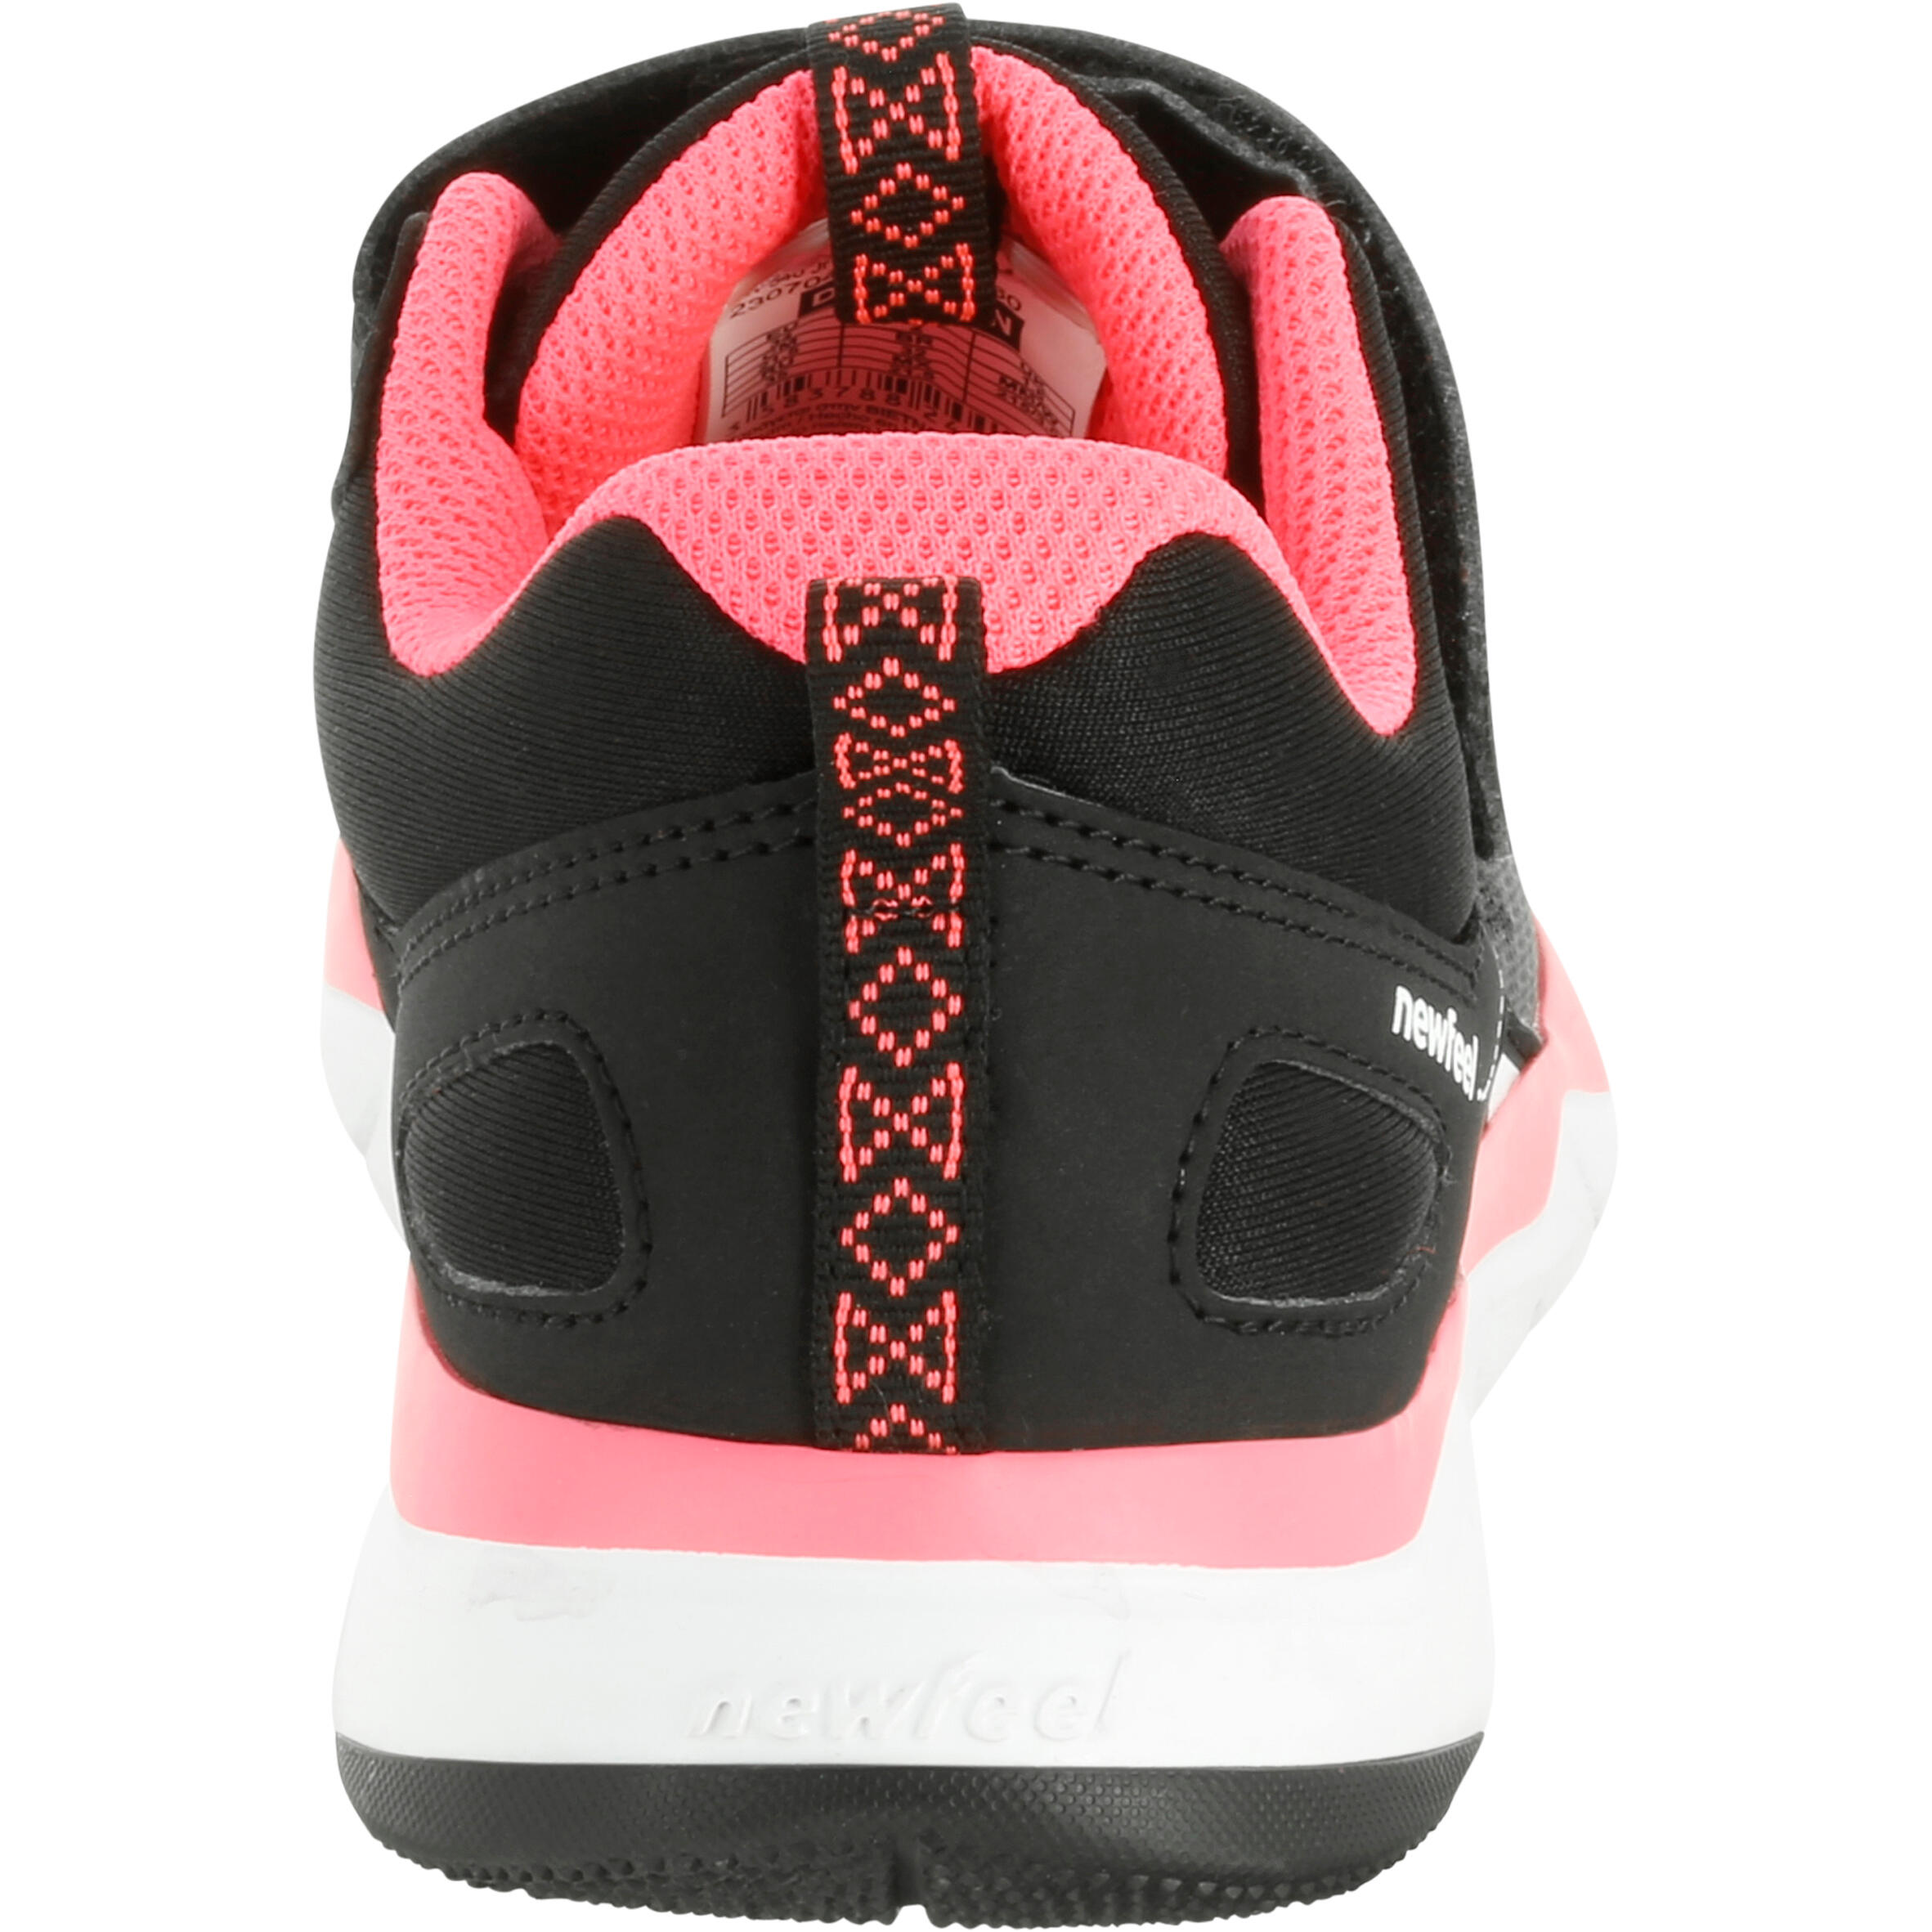 Kids' lightweight and breathable rip-tab trainers, black/pink 12/12